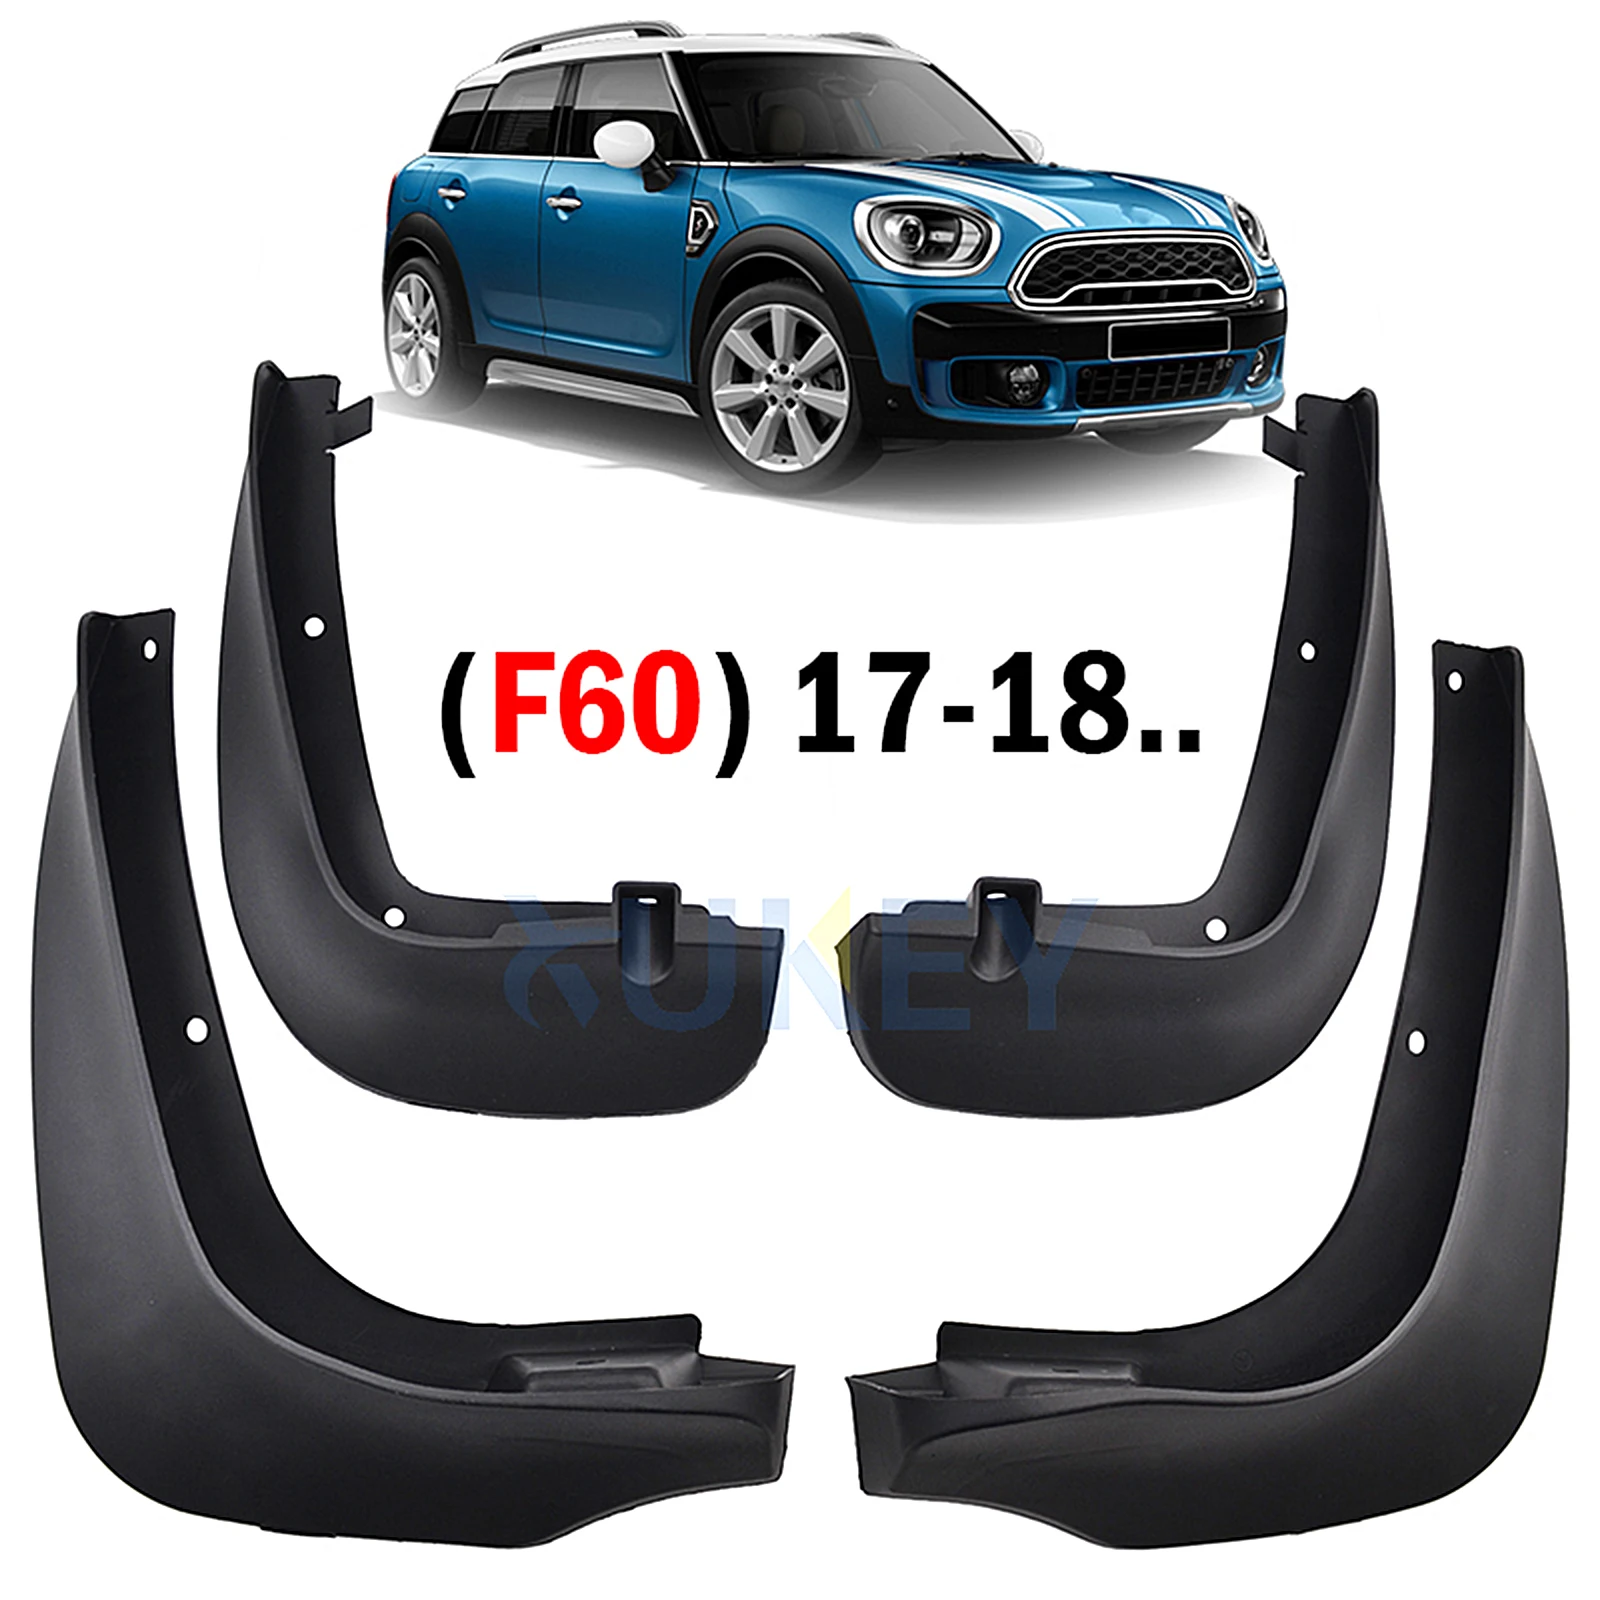 

OE Styled Car Mud Flaps For Mini Countryman F60 2017 2018 2019 2020 Mudflaps Splash Guards Mud Flap Mudguards Front Rear Fender